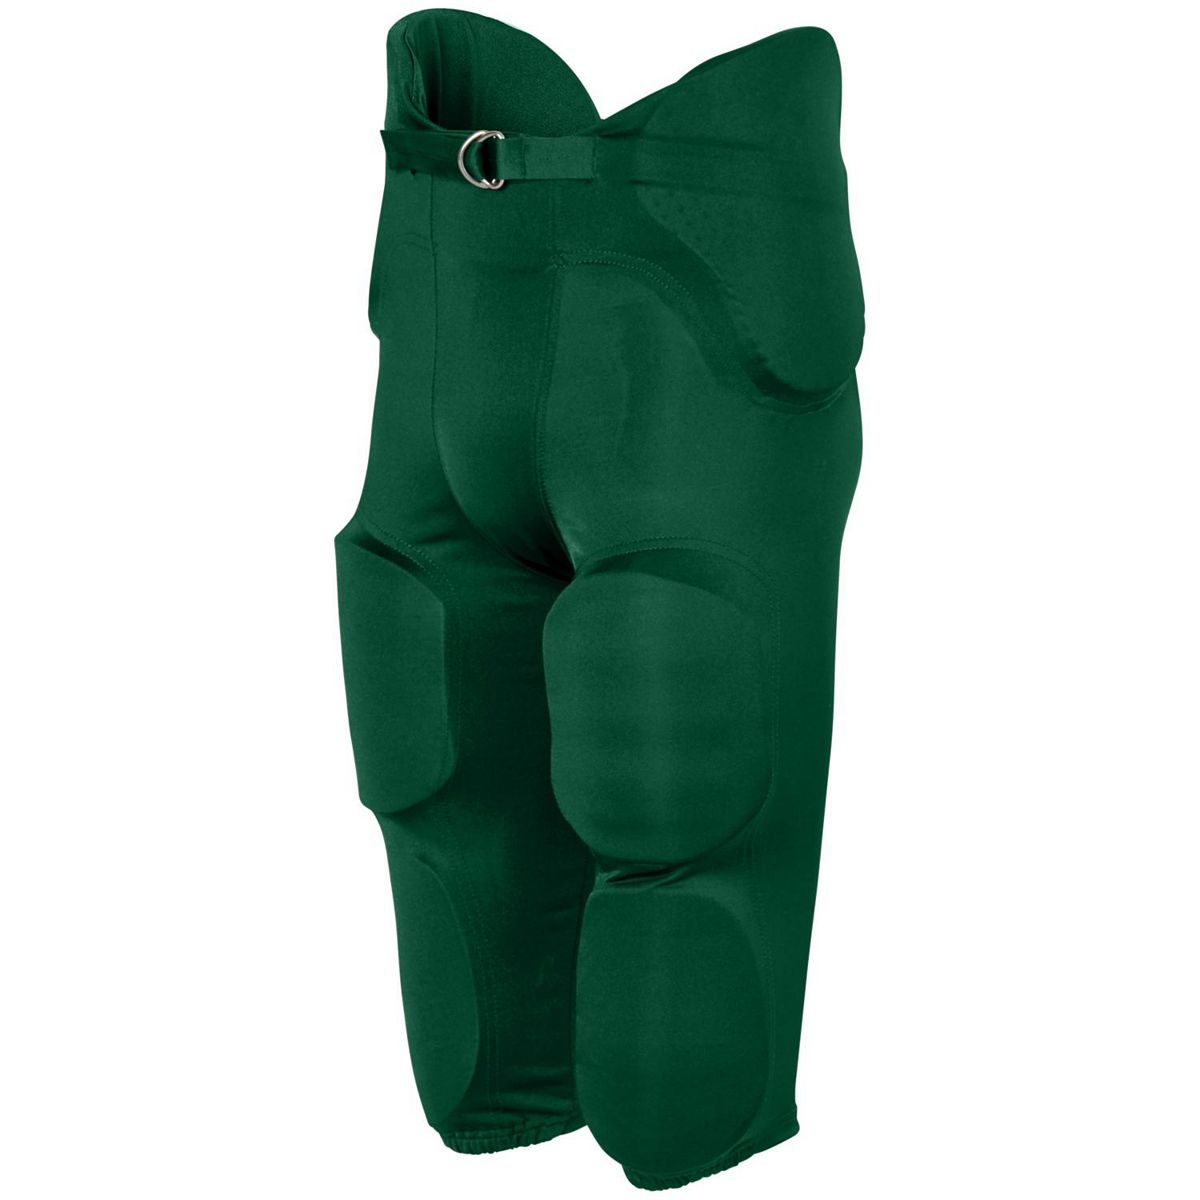 Augusta Sportswear Youth Phantom Integrated Pant in Dark Green  -Part of the Youth, Youth-Pants, Pants, Augusta-Products, Football, All-Sports, All-Sports-1 product lines at KanaleyCreations.com